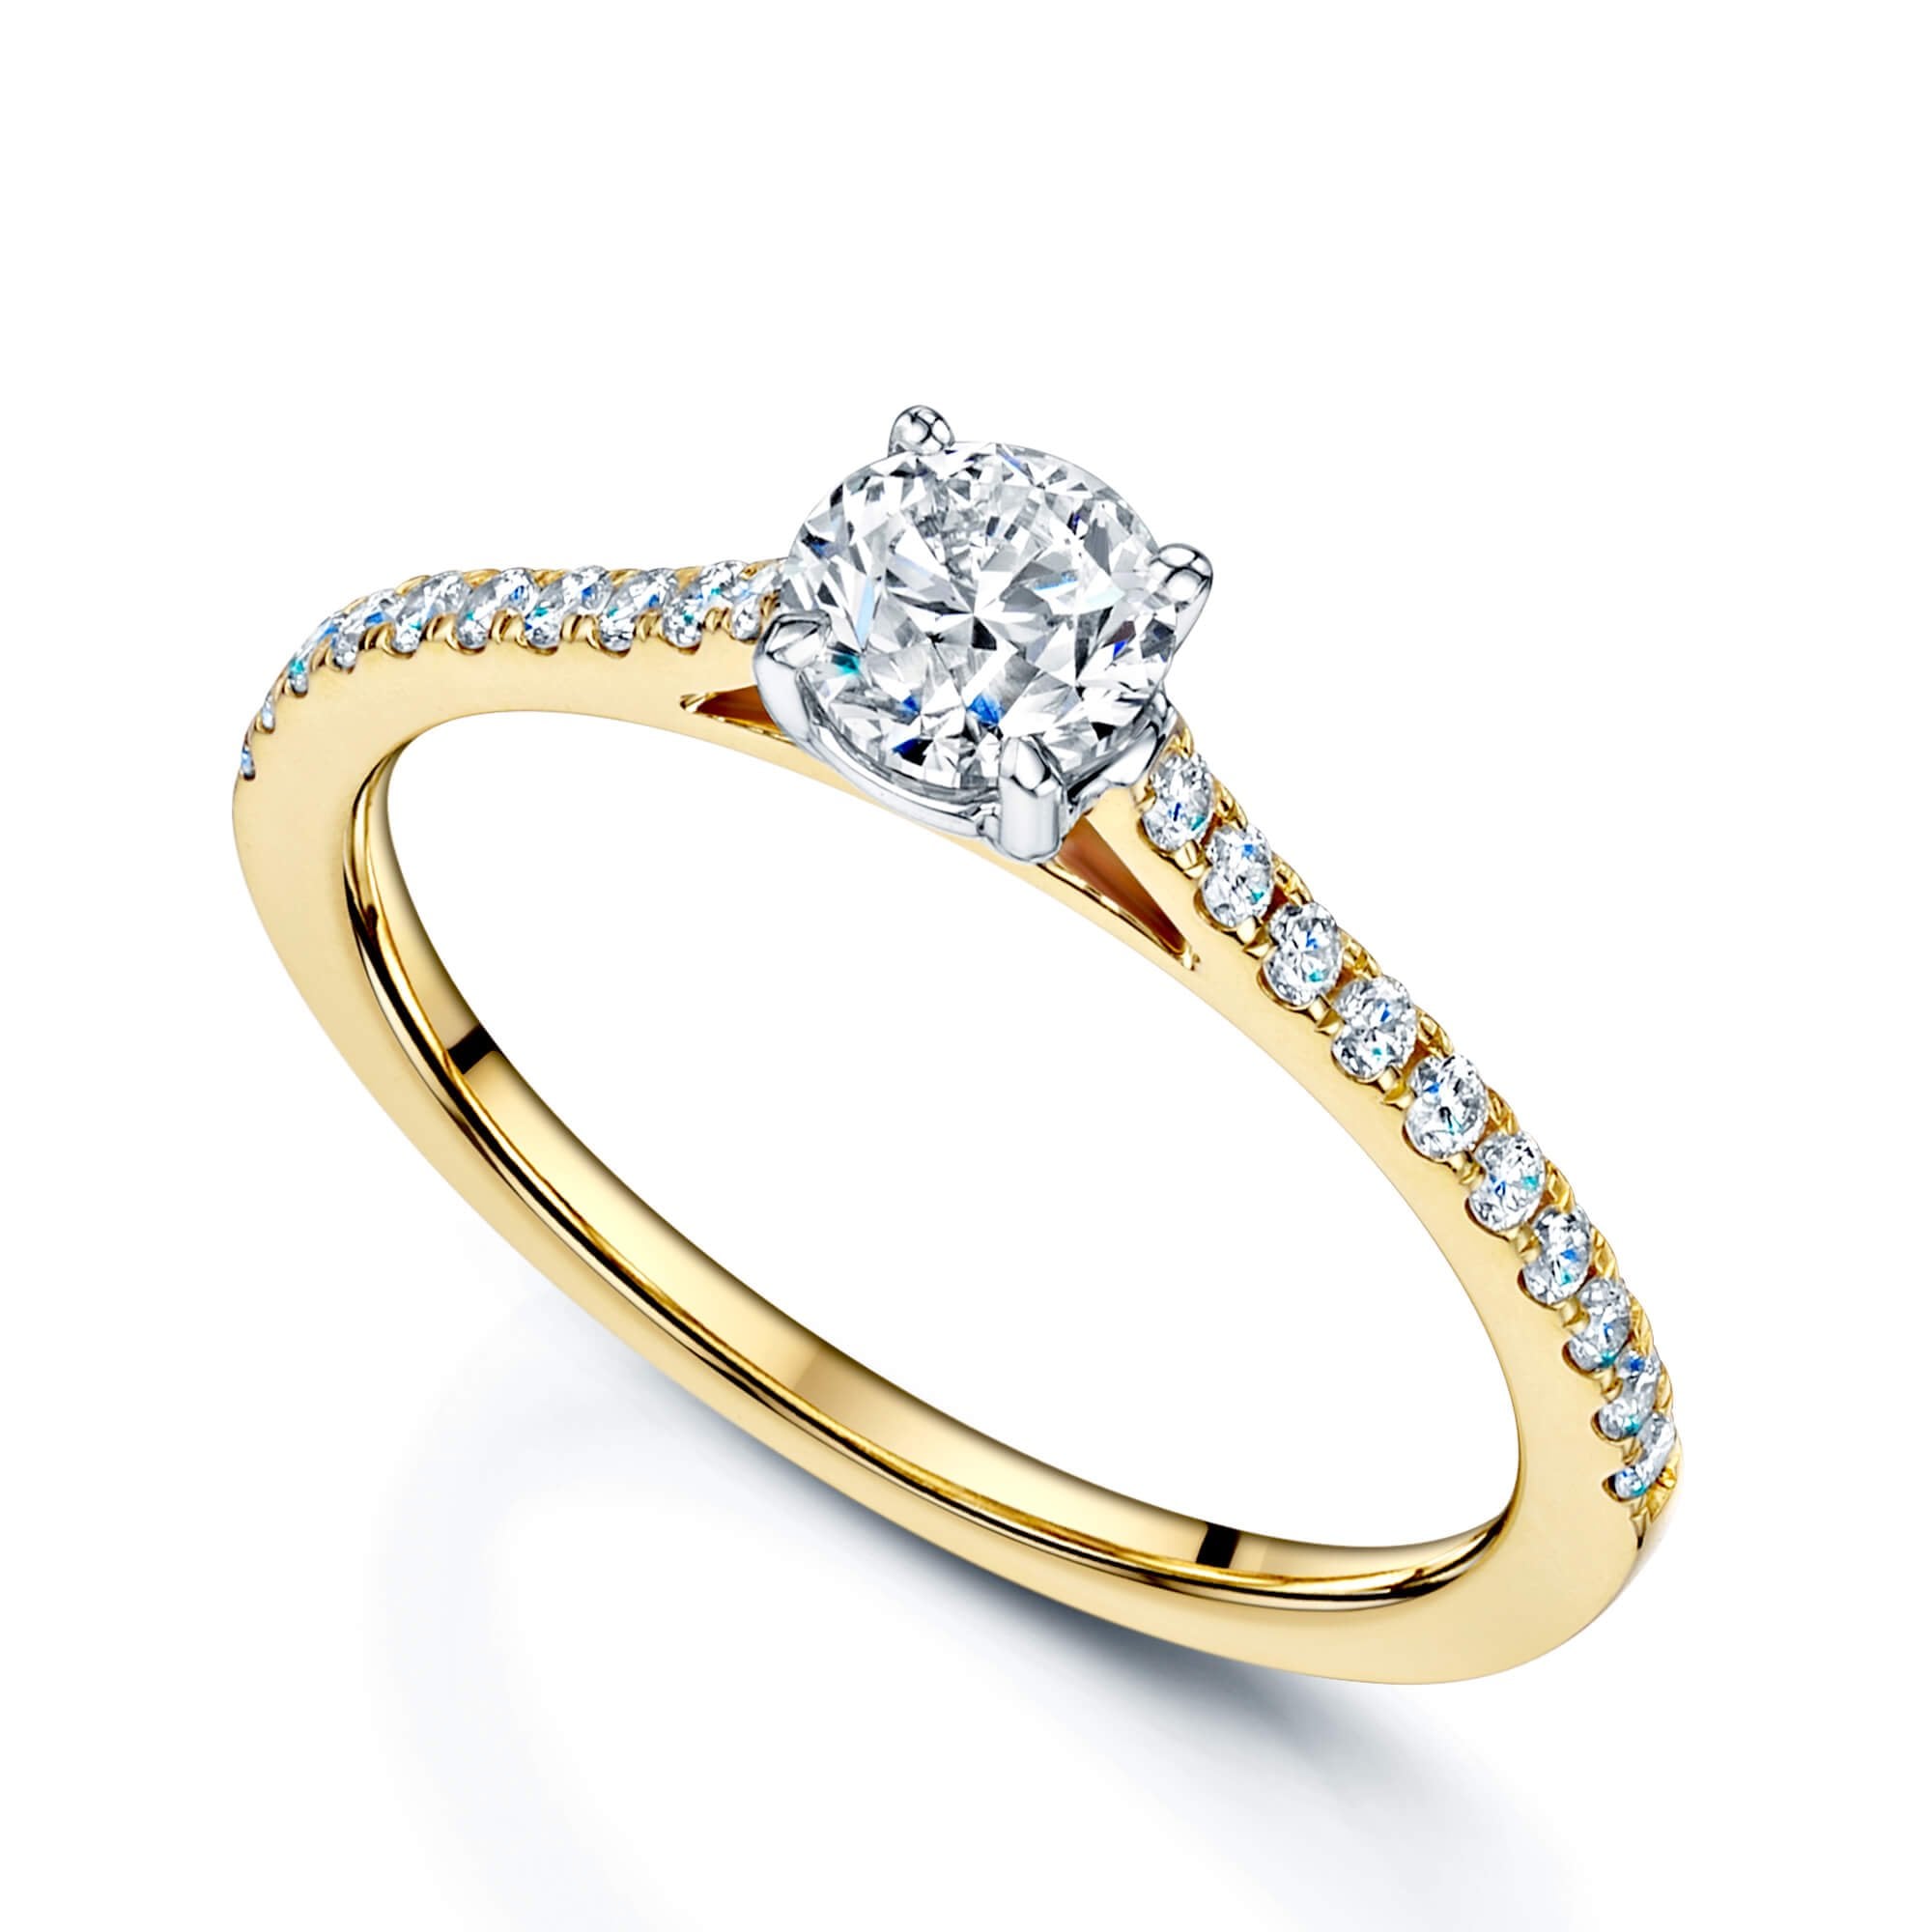 Simply Solitaire Collection 18ct Yellow Gold Diamond Solitaire Engagement Ring With Diamond Shoulders GIA Certified 0.50 Carat